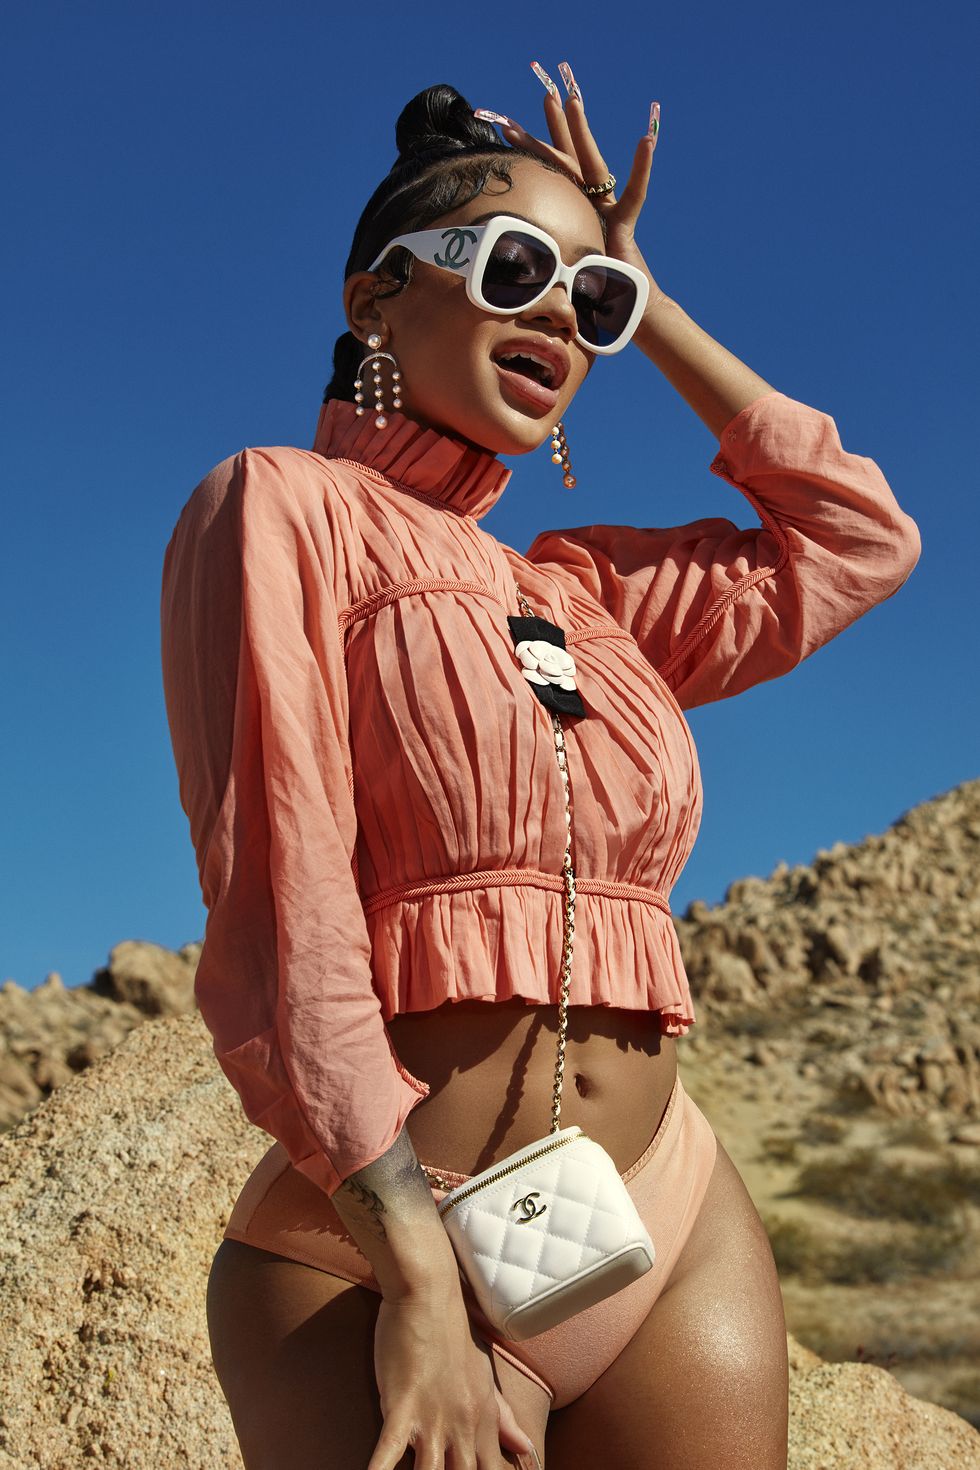 singer saweetie standing up with hand on head, wearing a salmon pink top and boyshorts with white sunglasses and a white clutch, in front of a desert and sky background